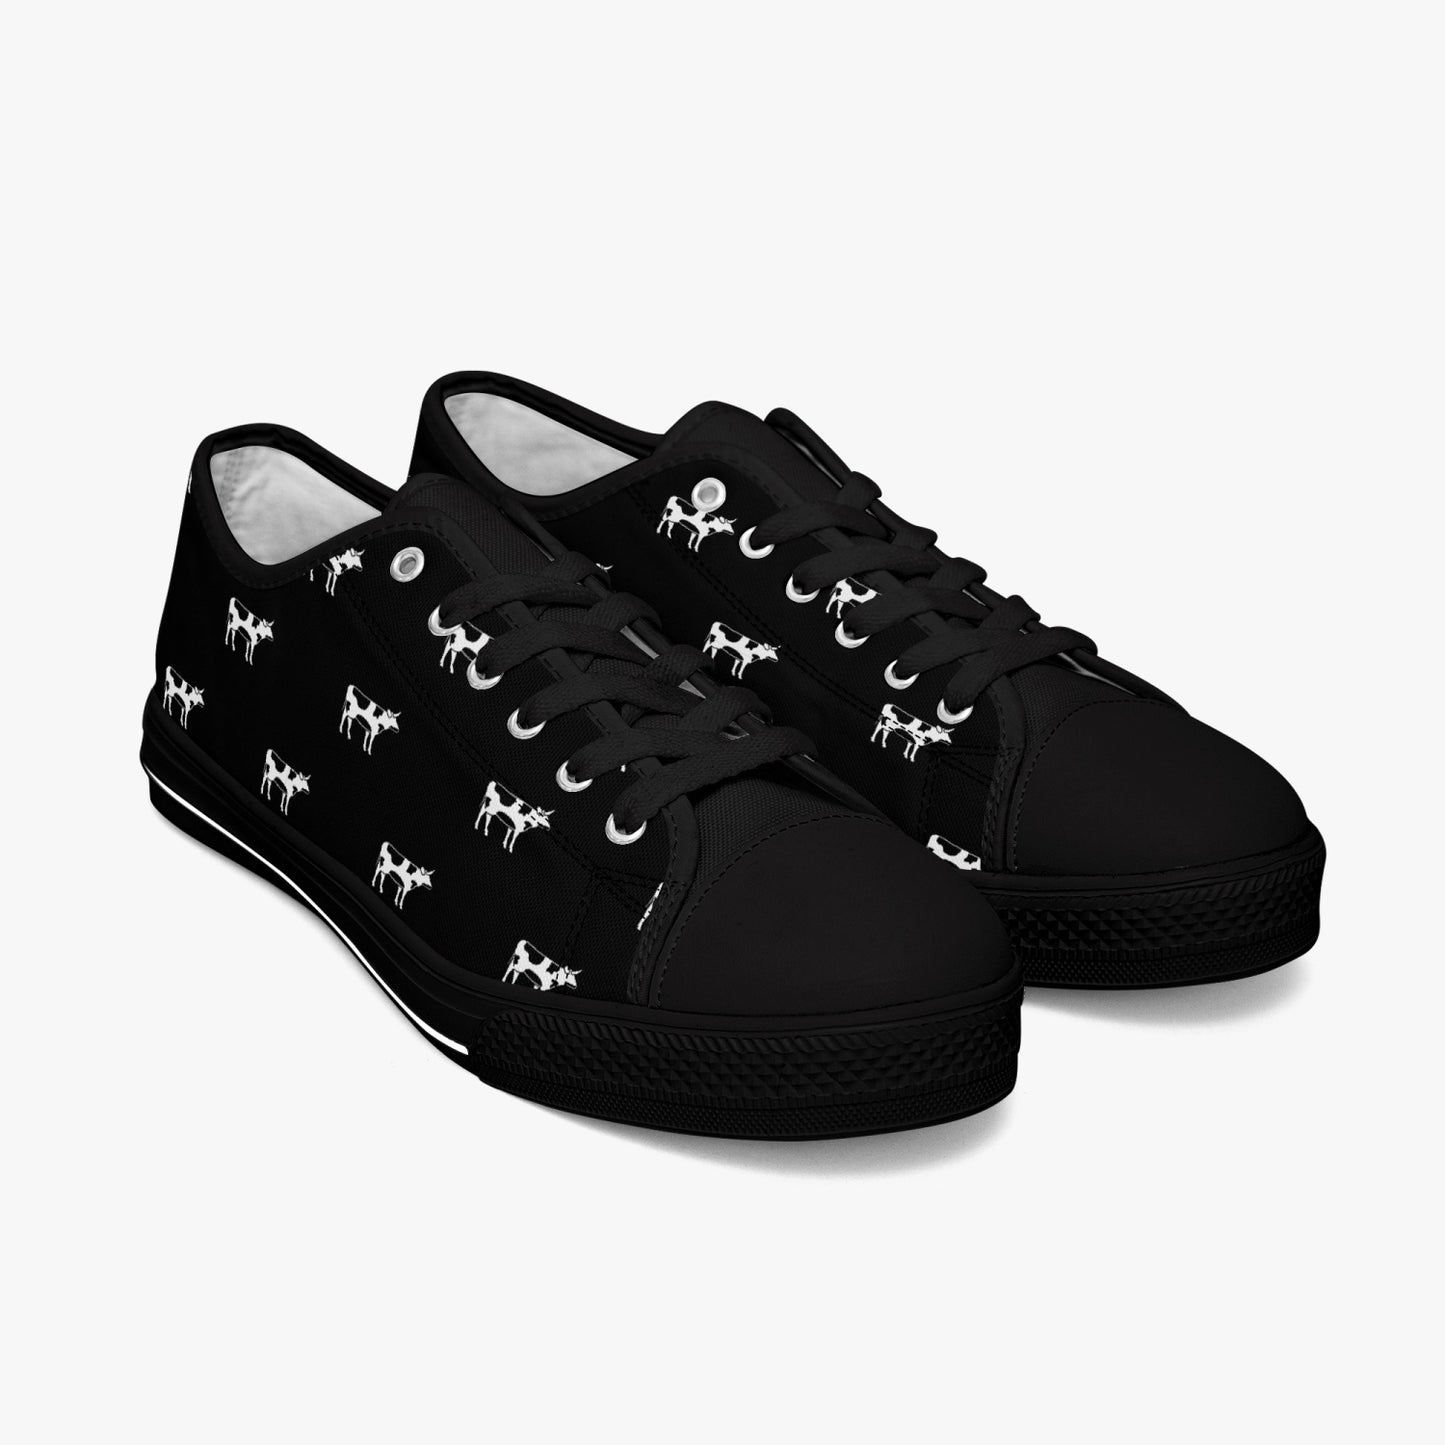 Chaussures basses - Motif vaches